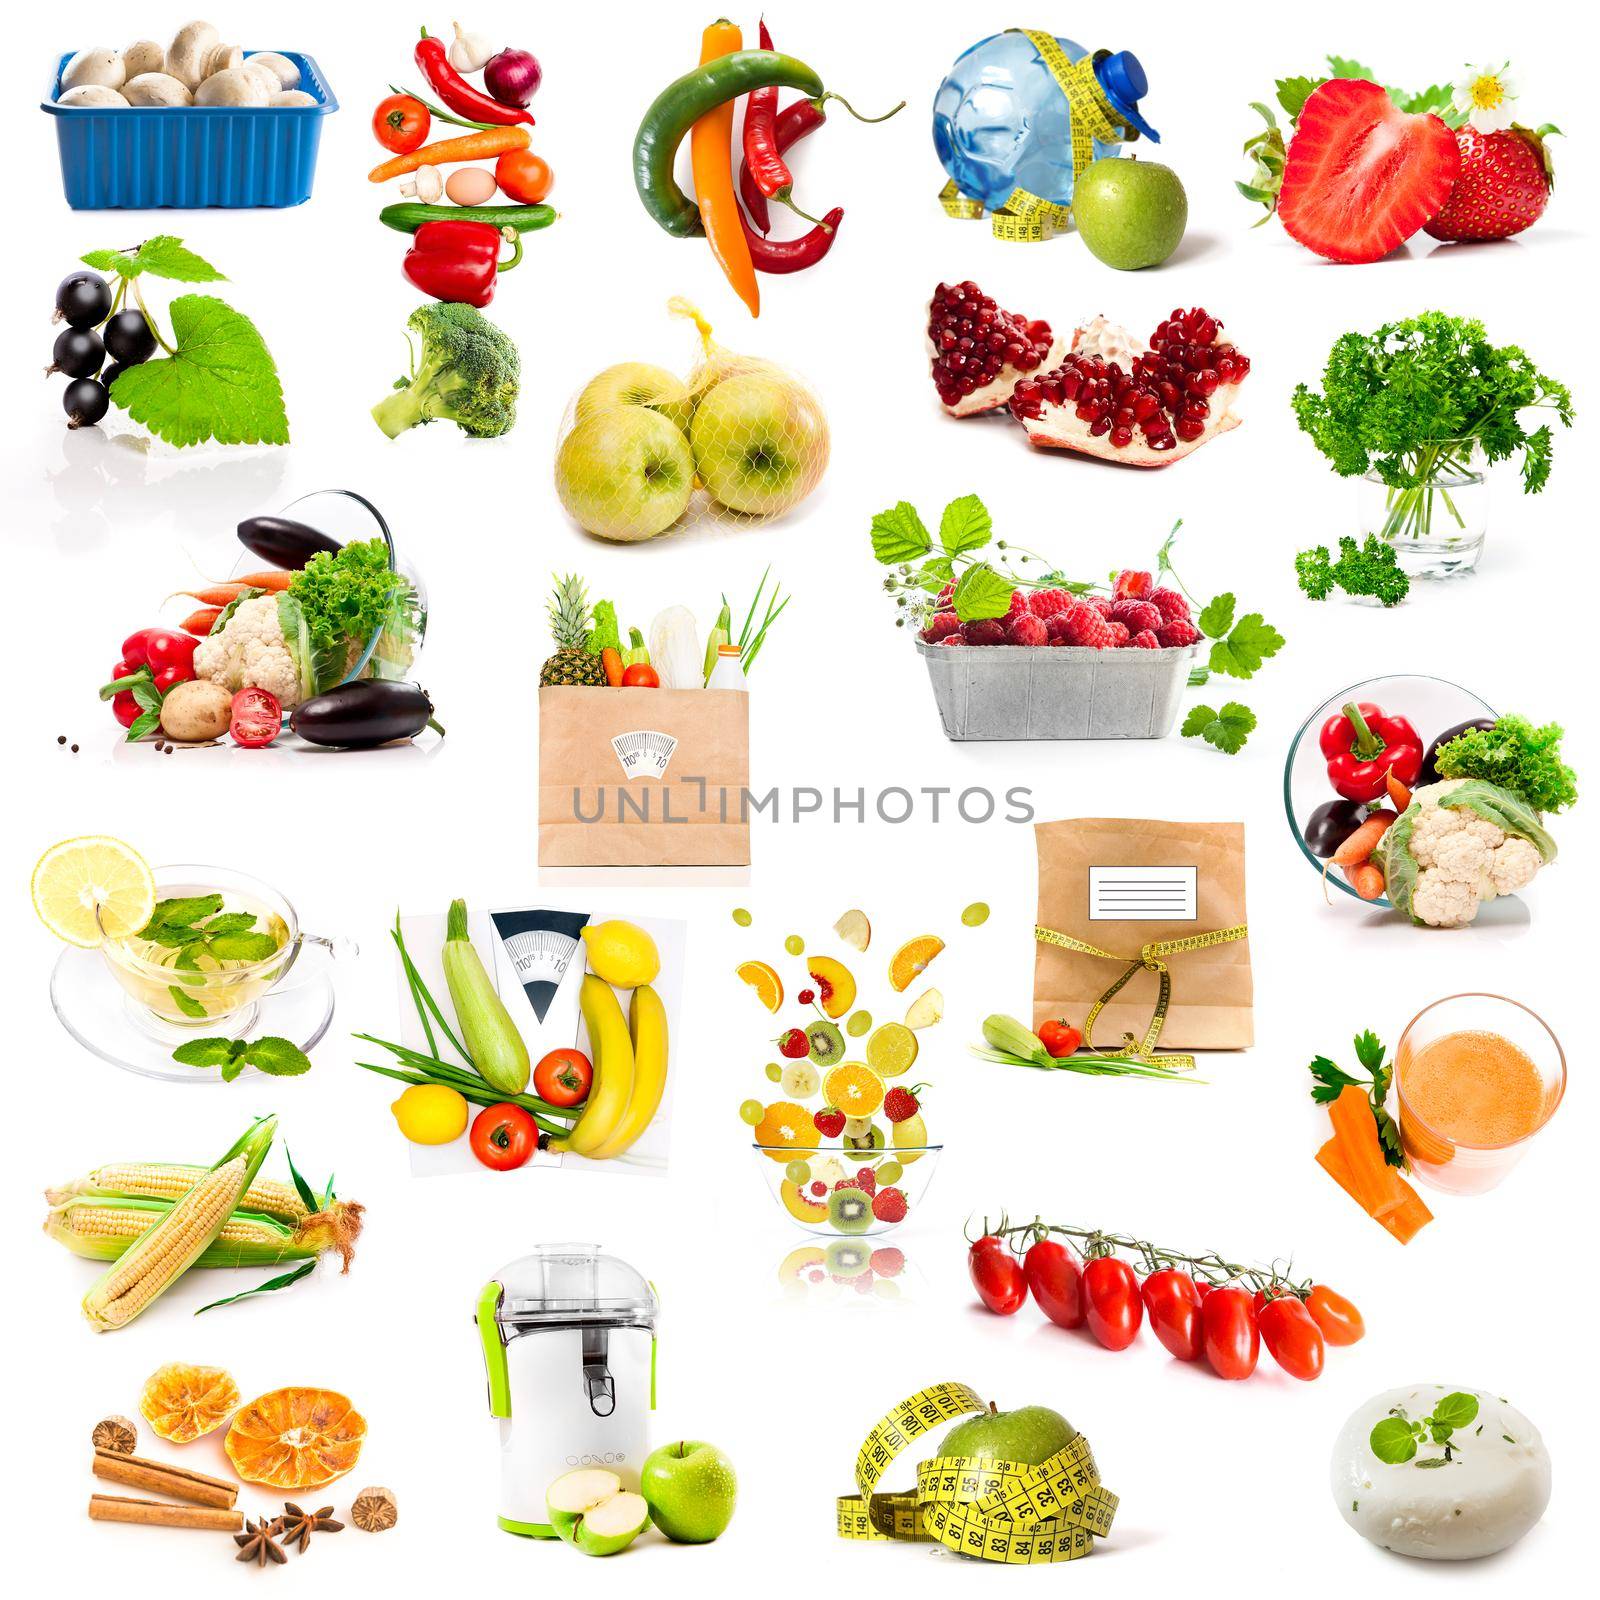 fruits and vegetables collage isolated on white background